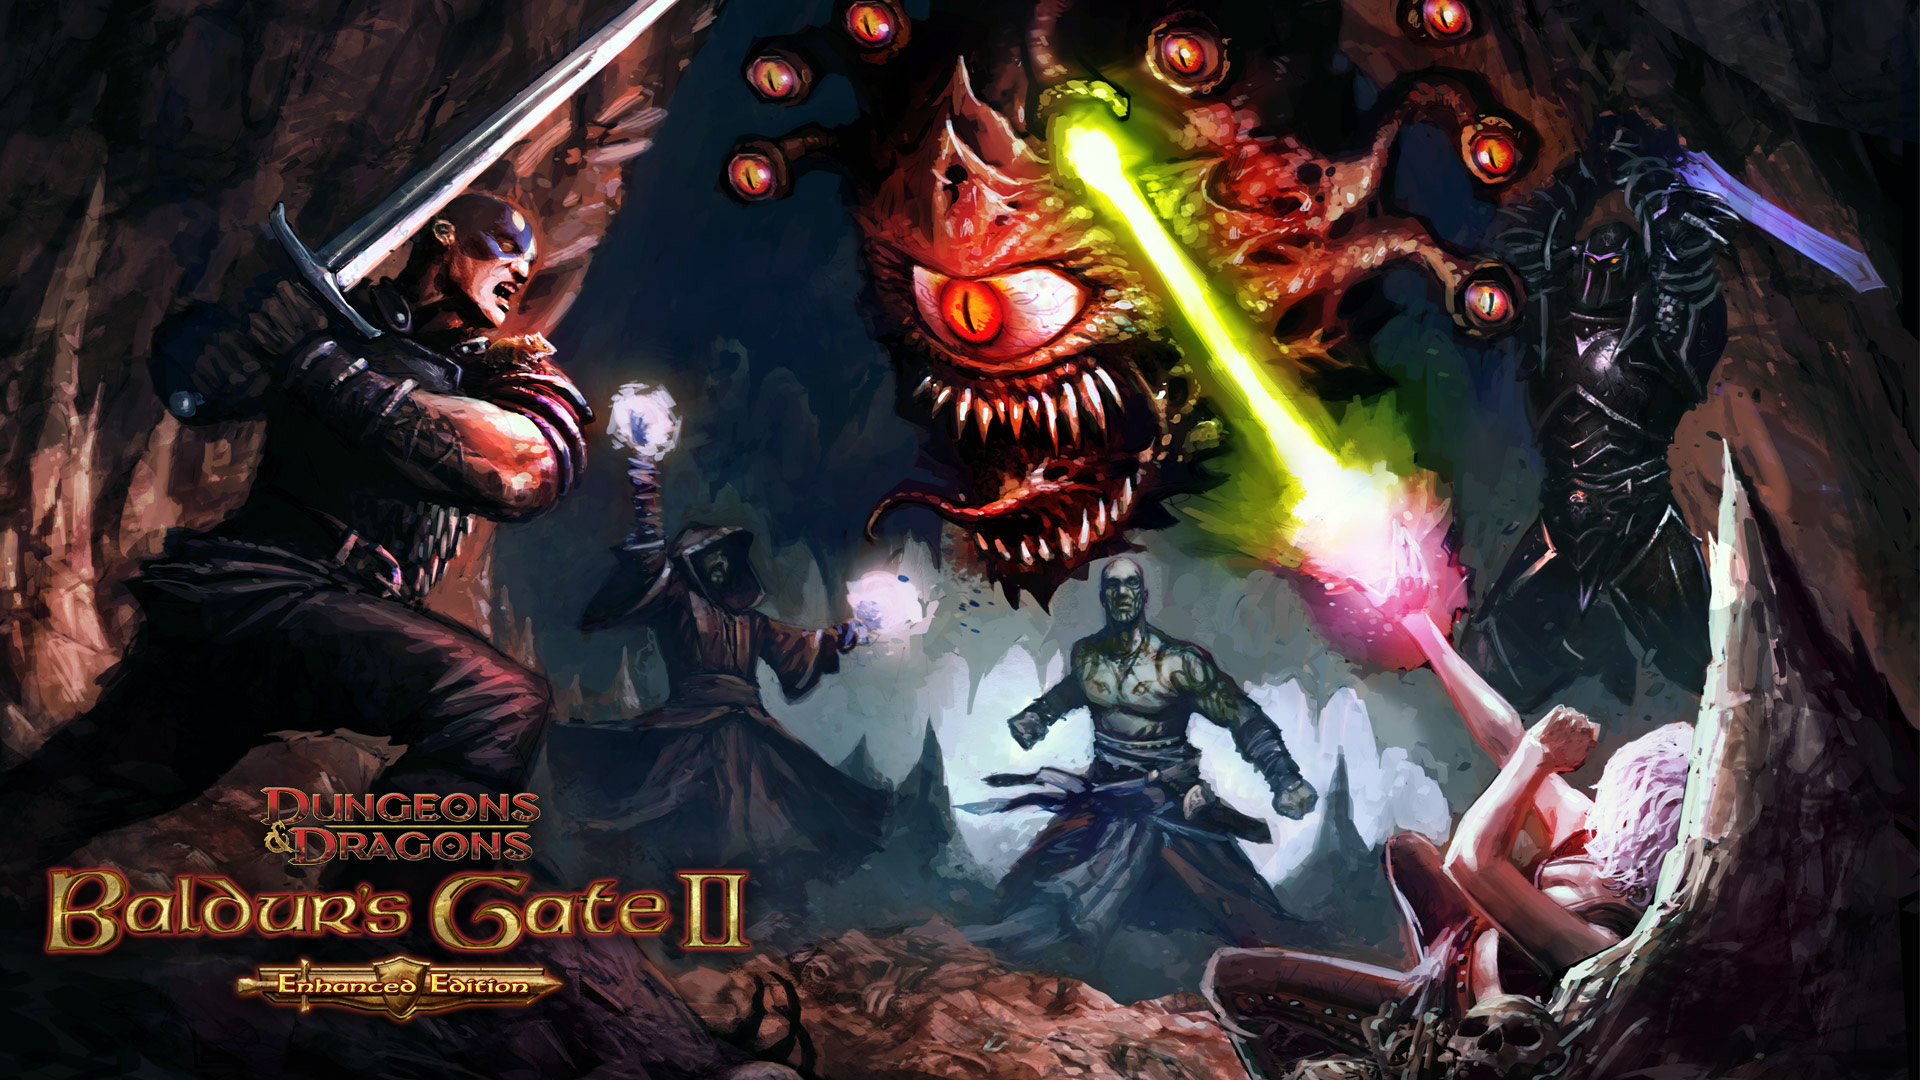 Baldur's Gate II: Enhanced Edition is a well-regarded revival of the PC role-playing classic.